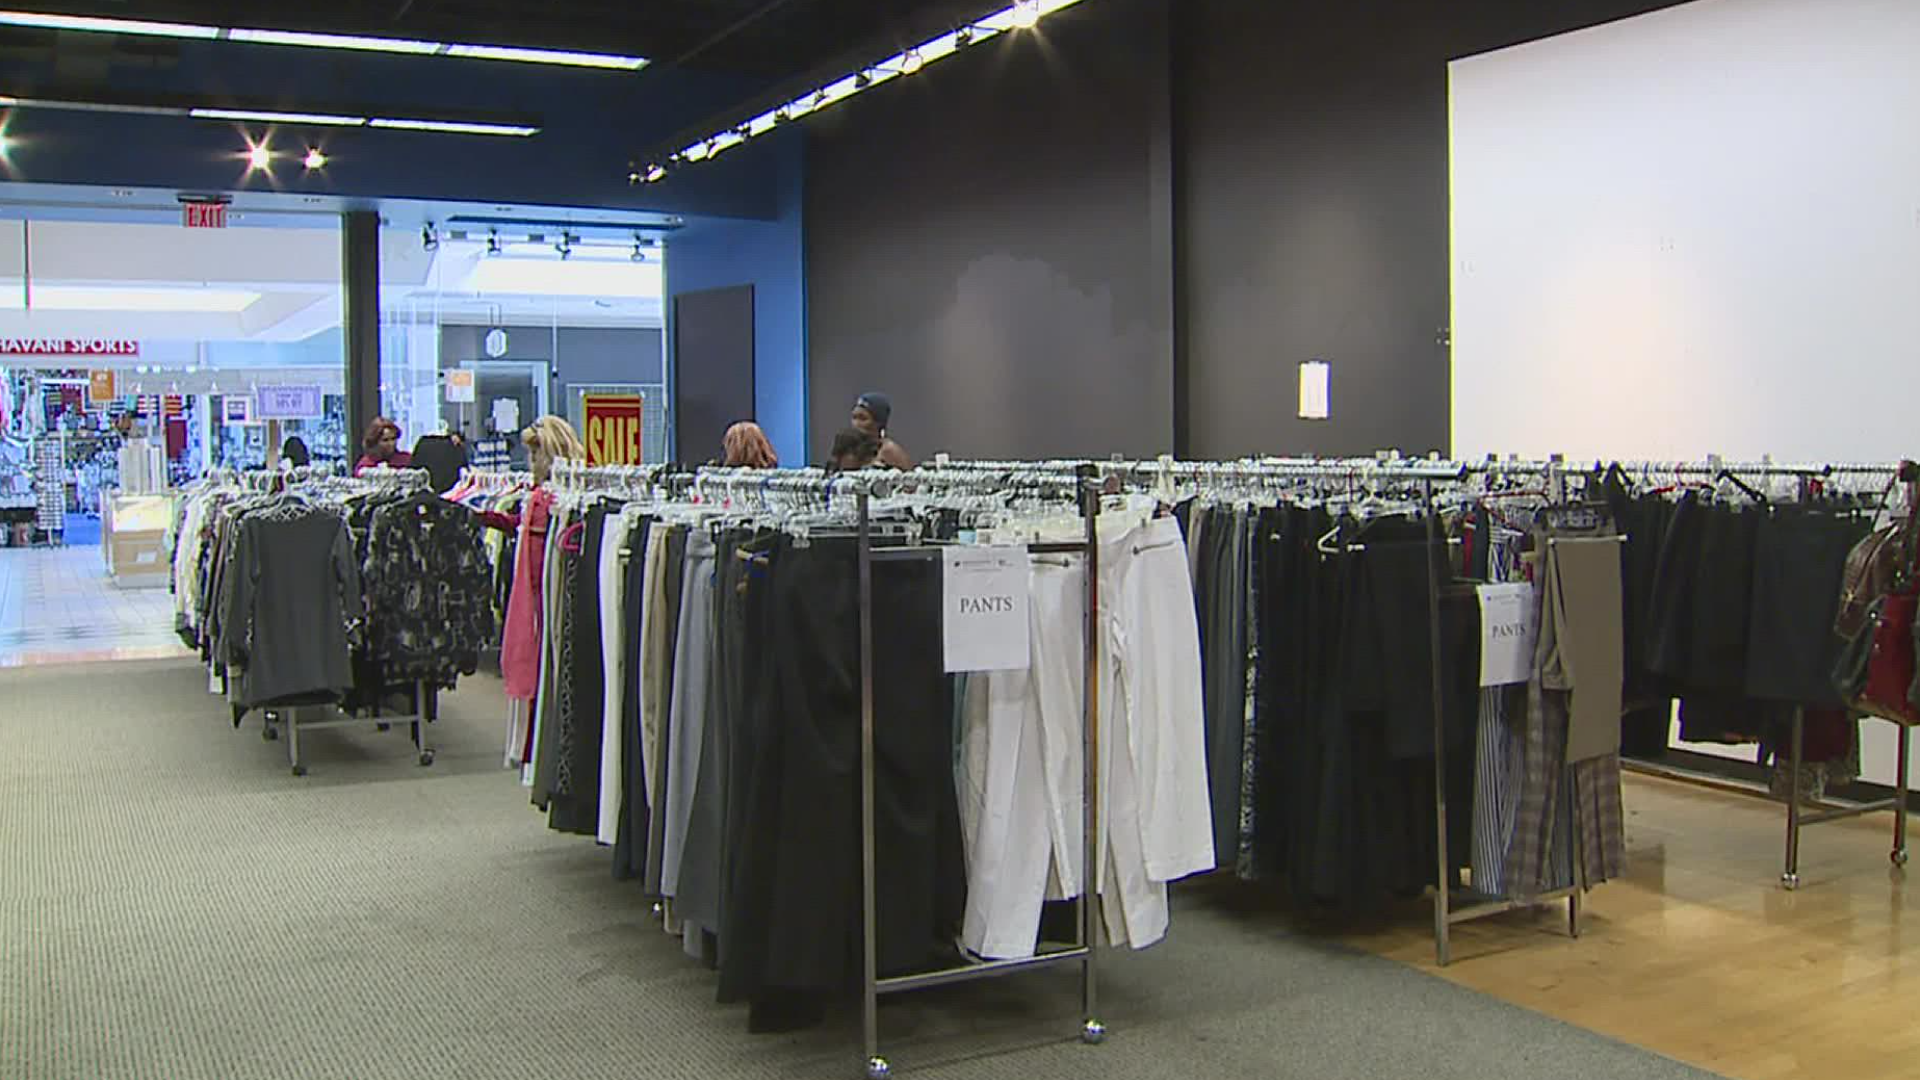 Suits to Careers, Inc. is giving people a chance to shop its closet at the organization's "Fall Inventory Reduction Sale" at the Harrisburg mall in Swatara Township.